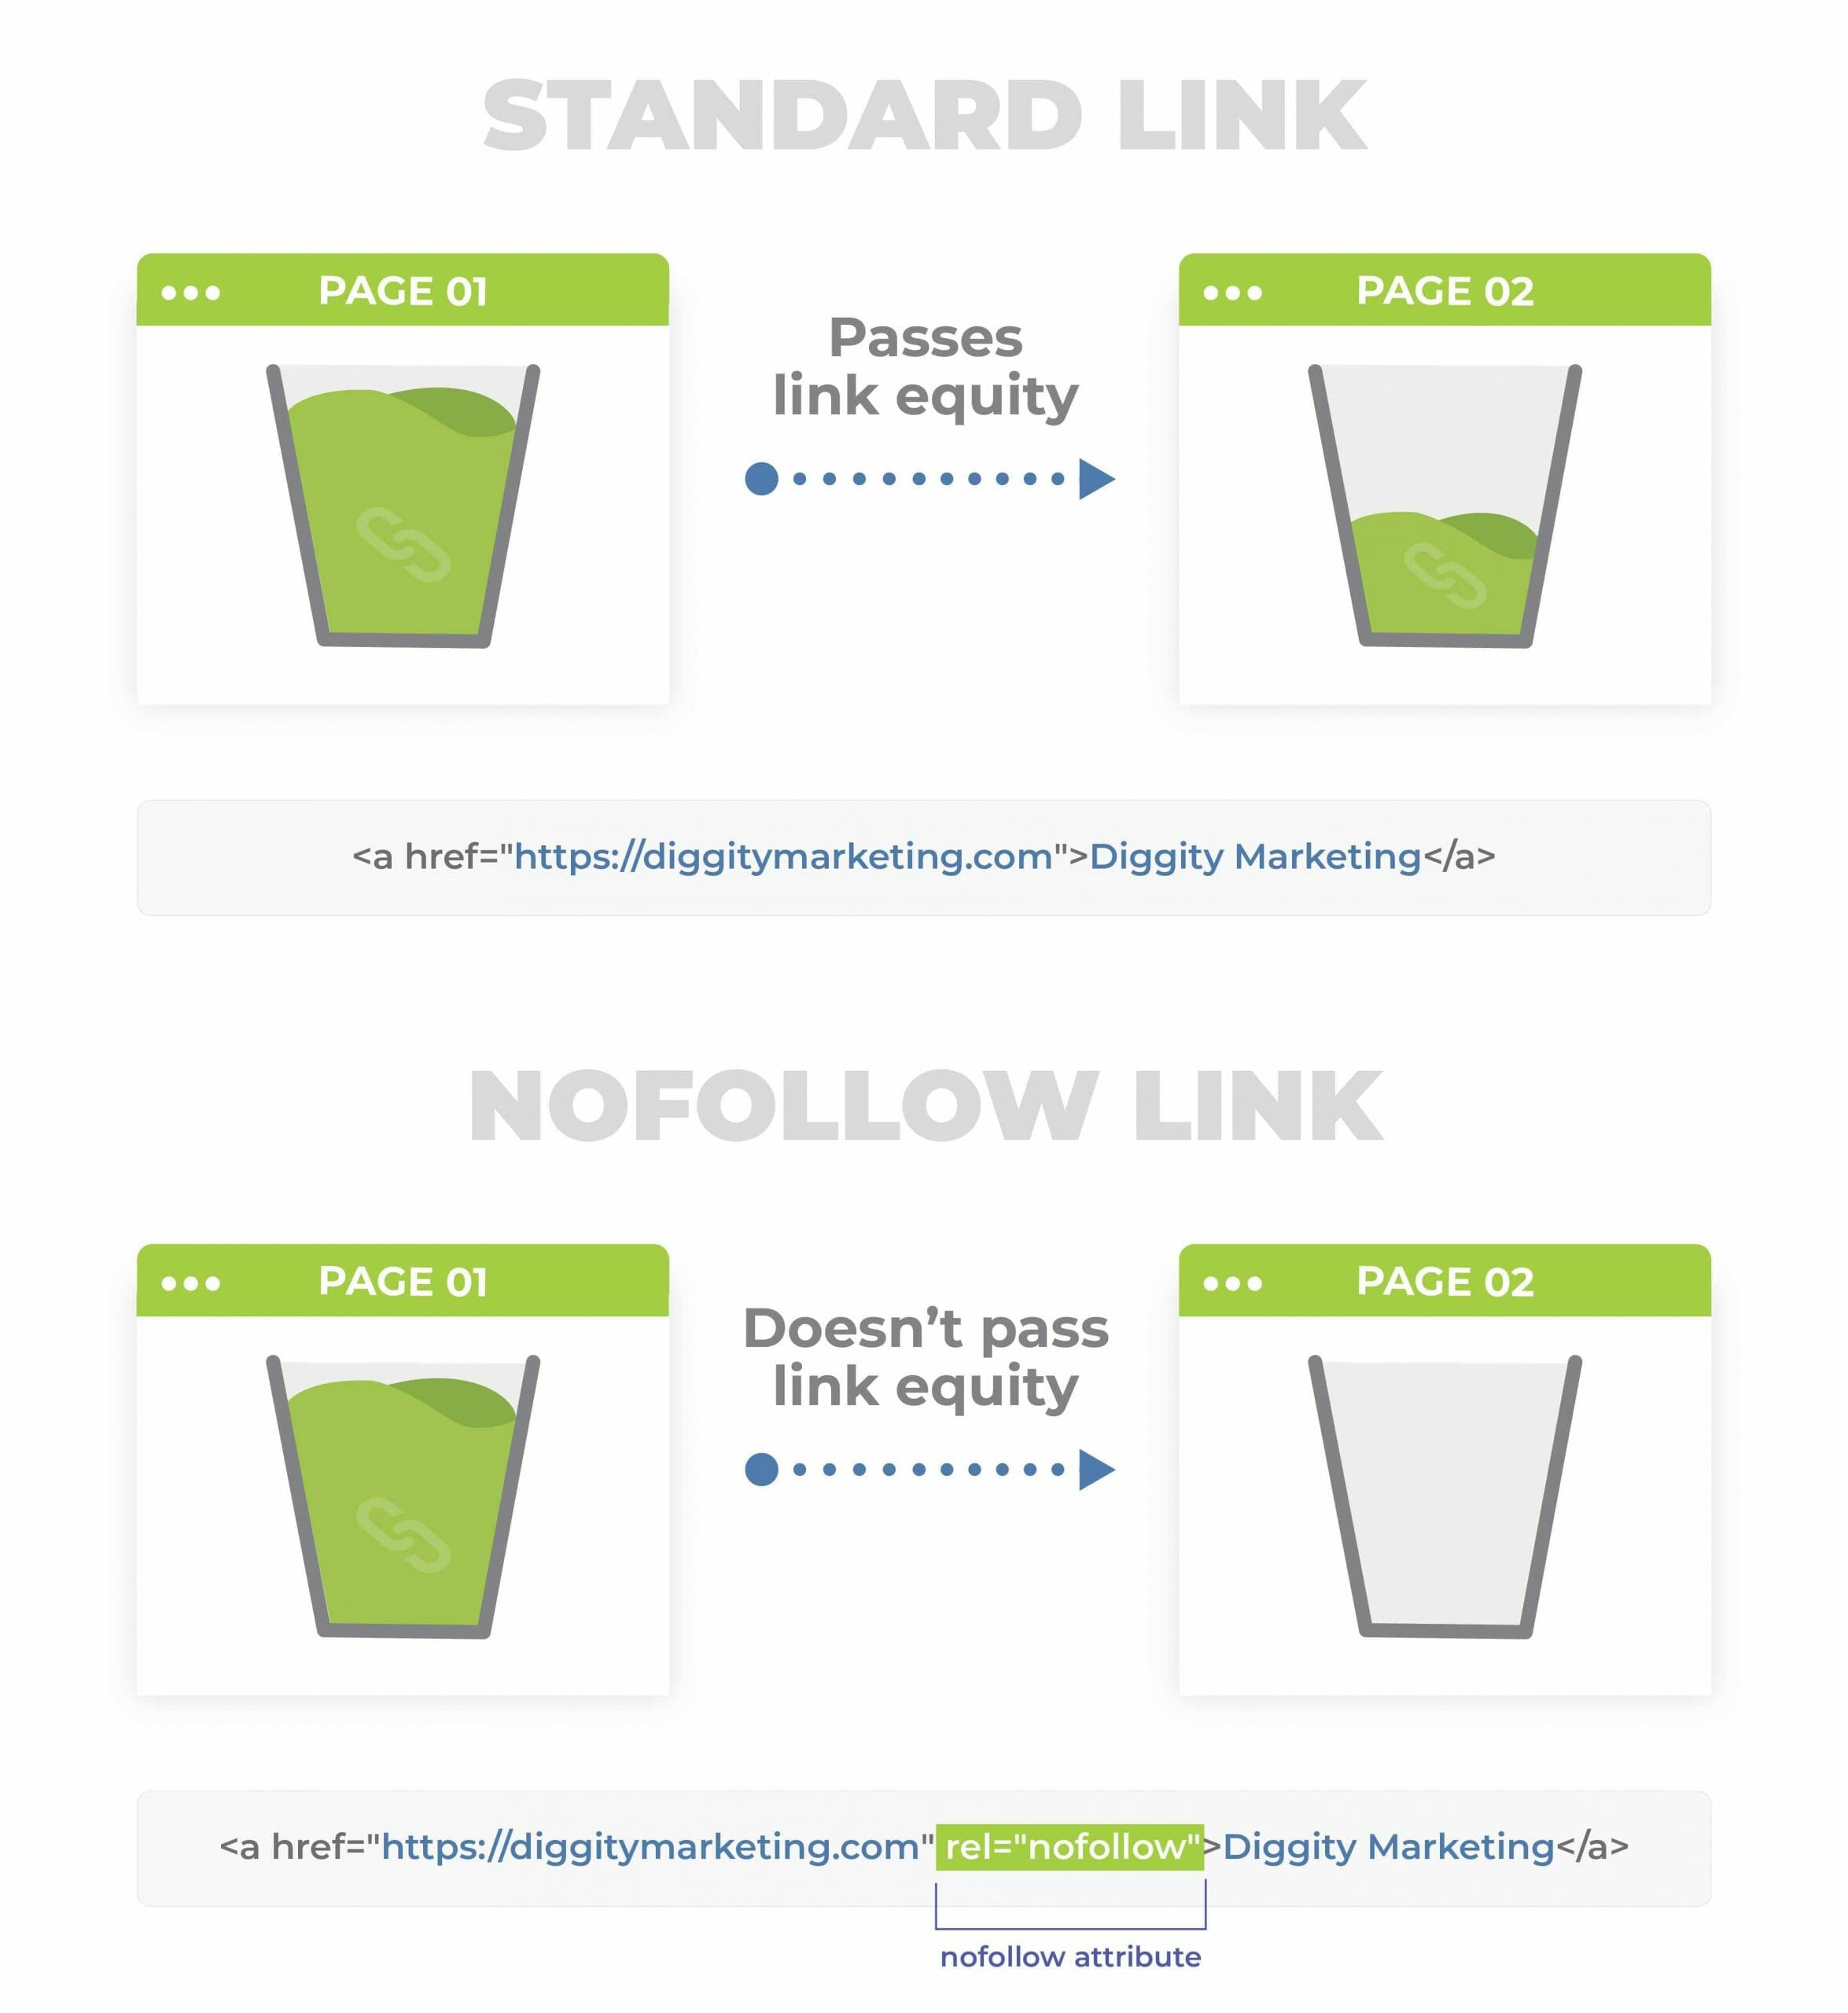 nofollow and standard link illustration